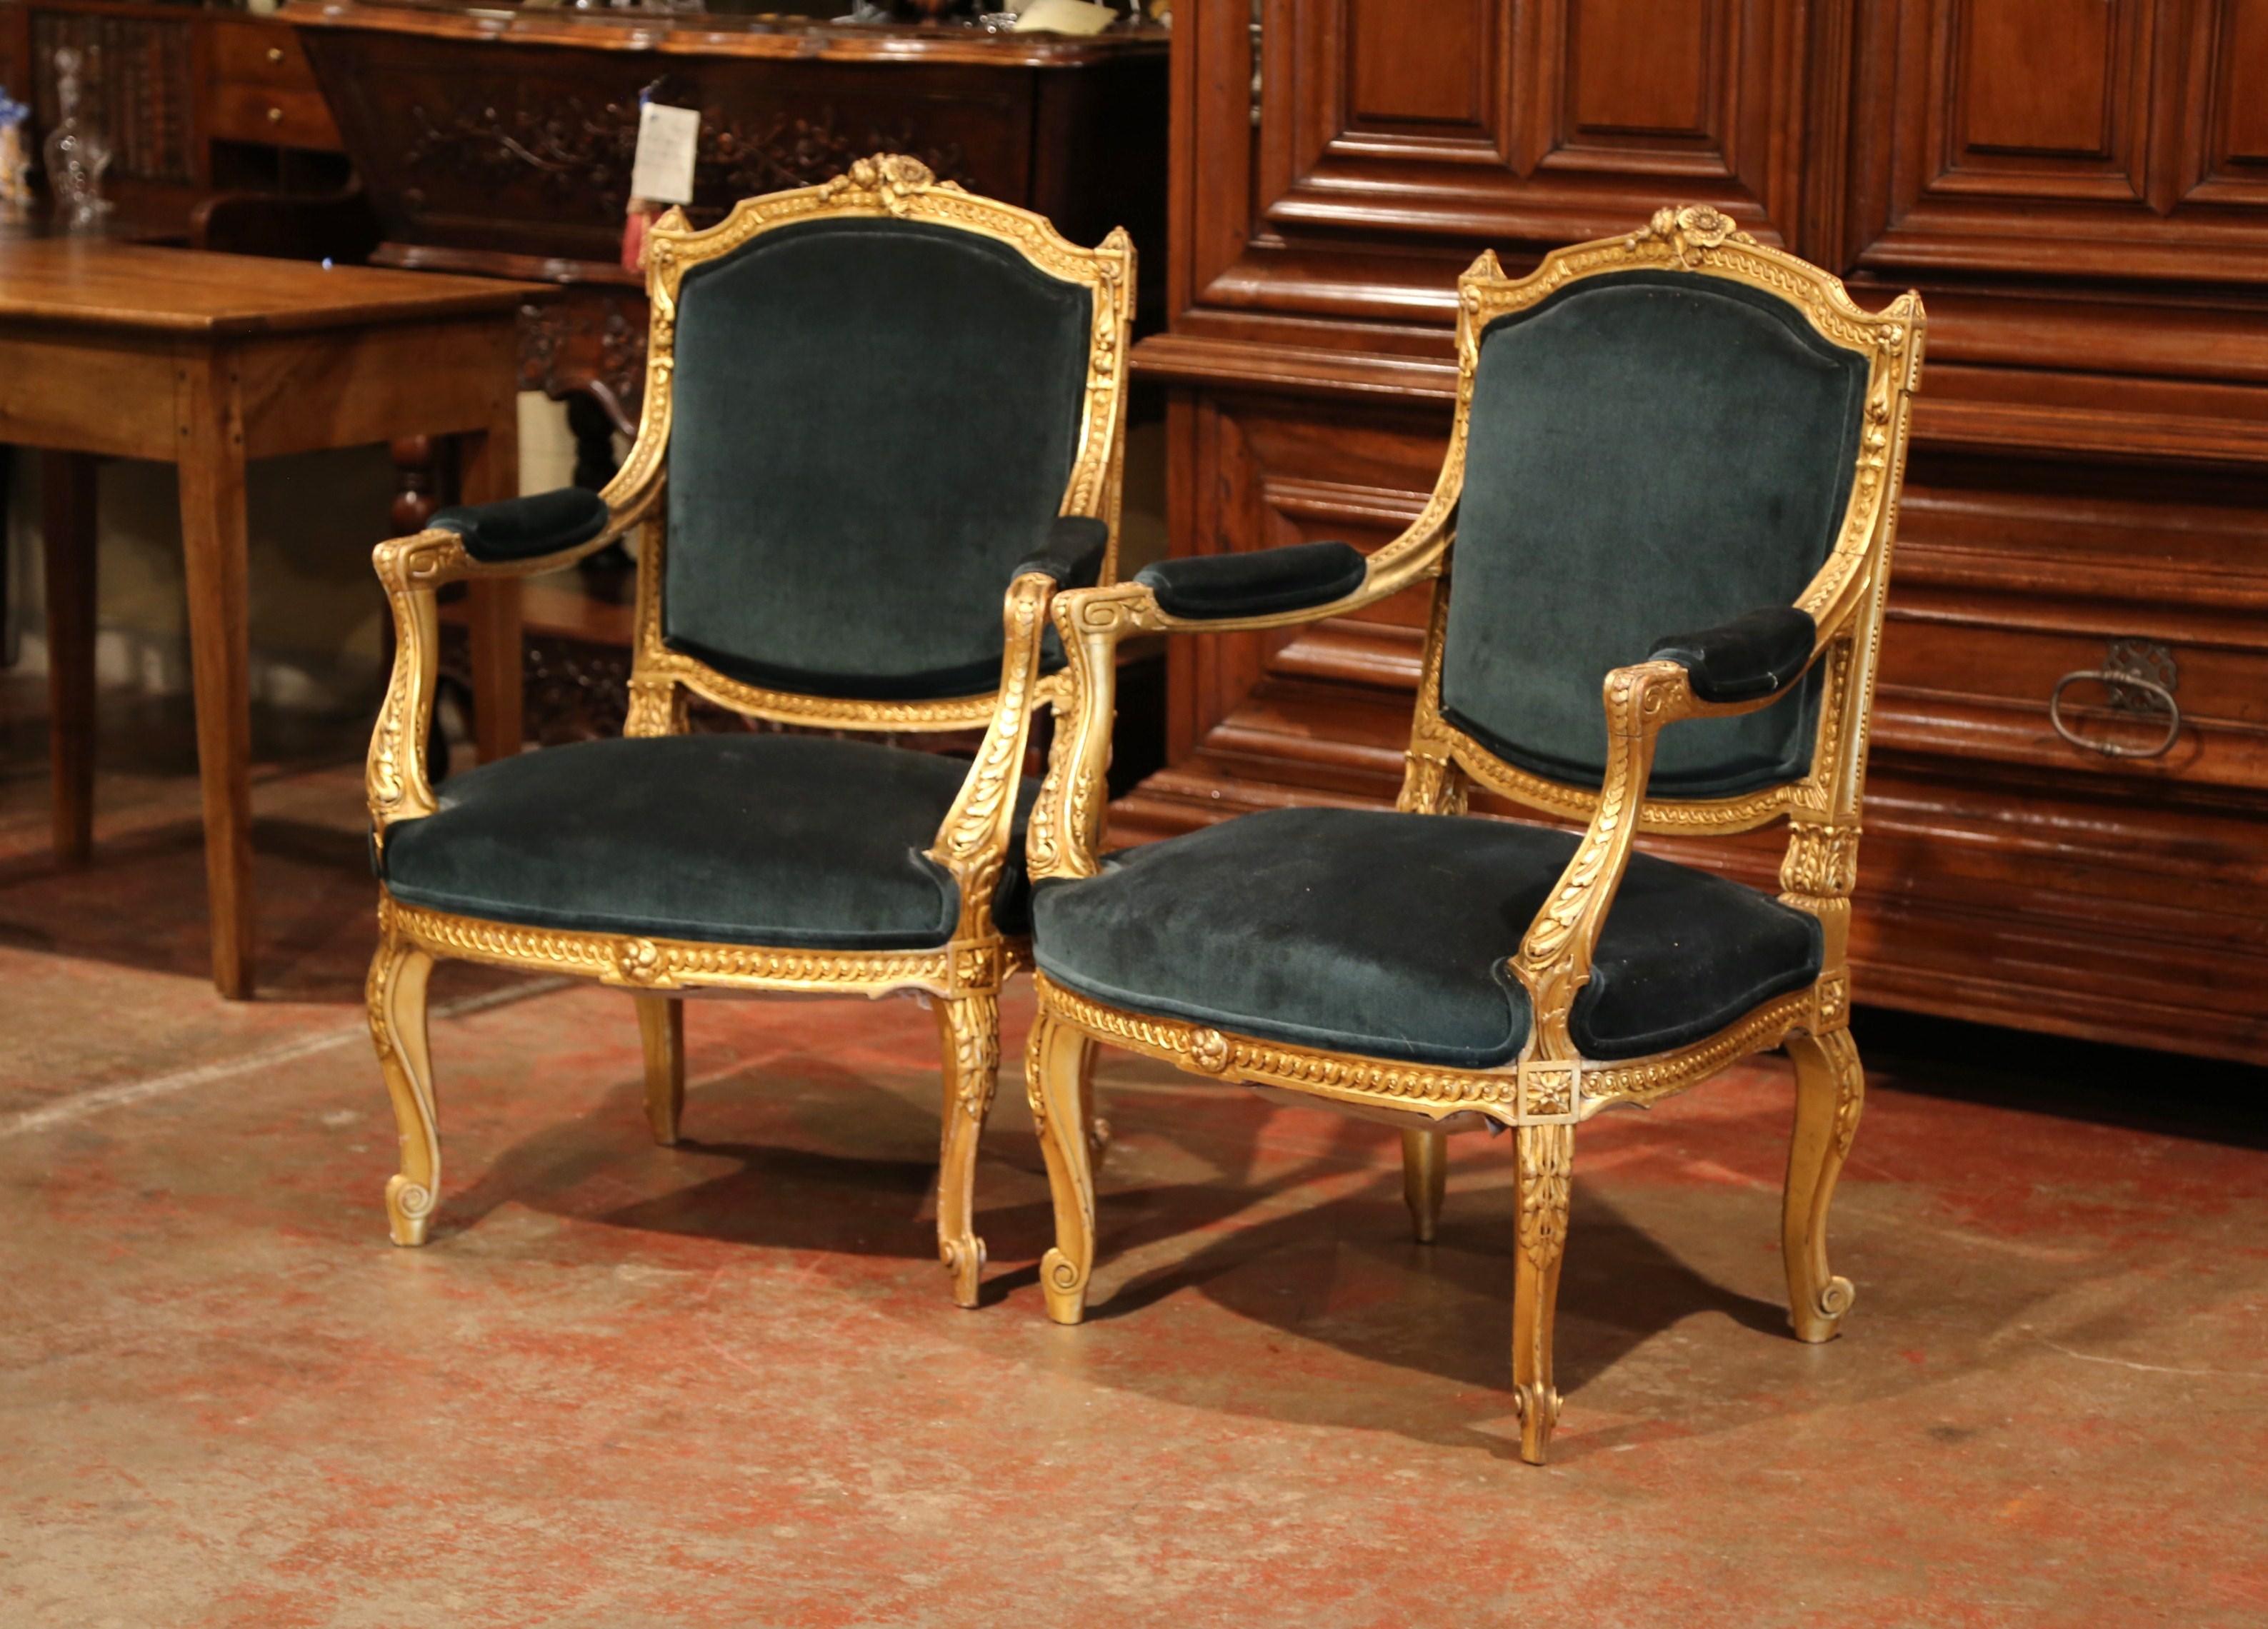 Place these elegant antique fauteuils in a living room or a study. Crafted in France circa 1870, each traditional, French armchair sits on cabriole legs decorated with carved acanthus leaves at the shoulder. The arched back is decorated with floral